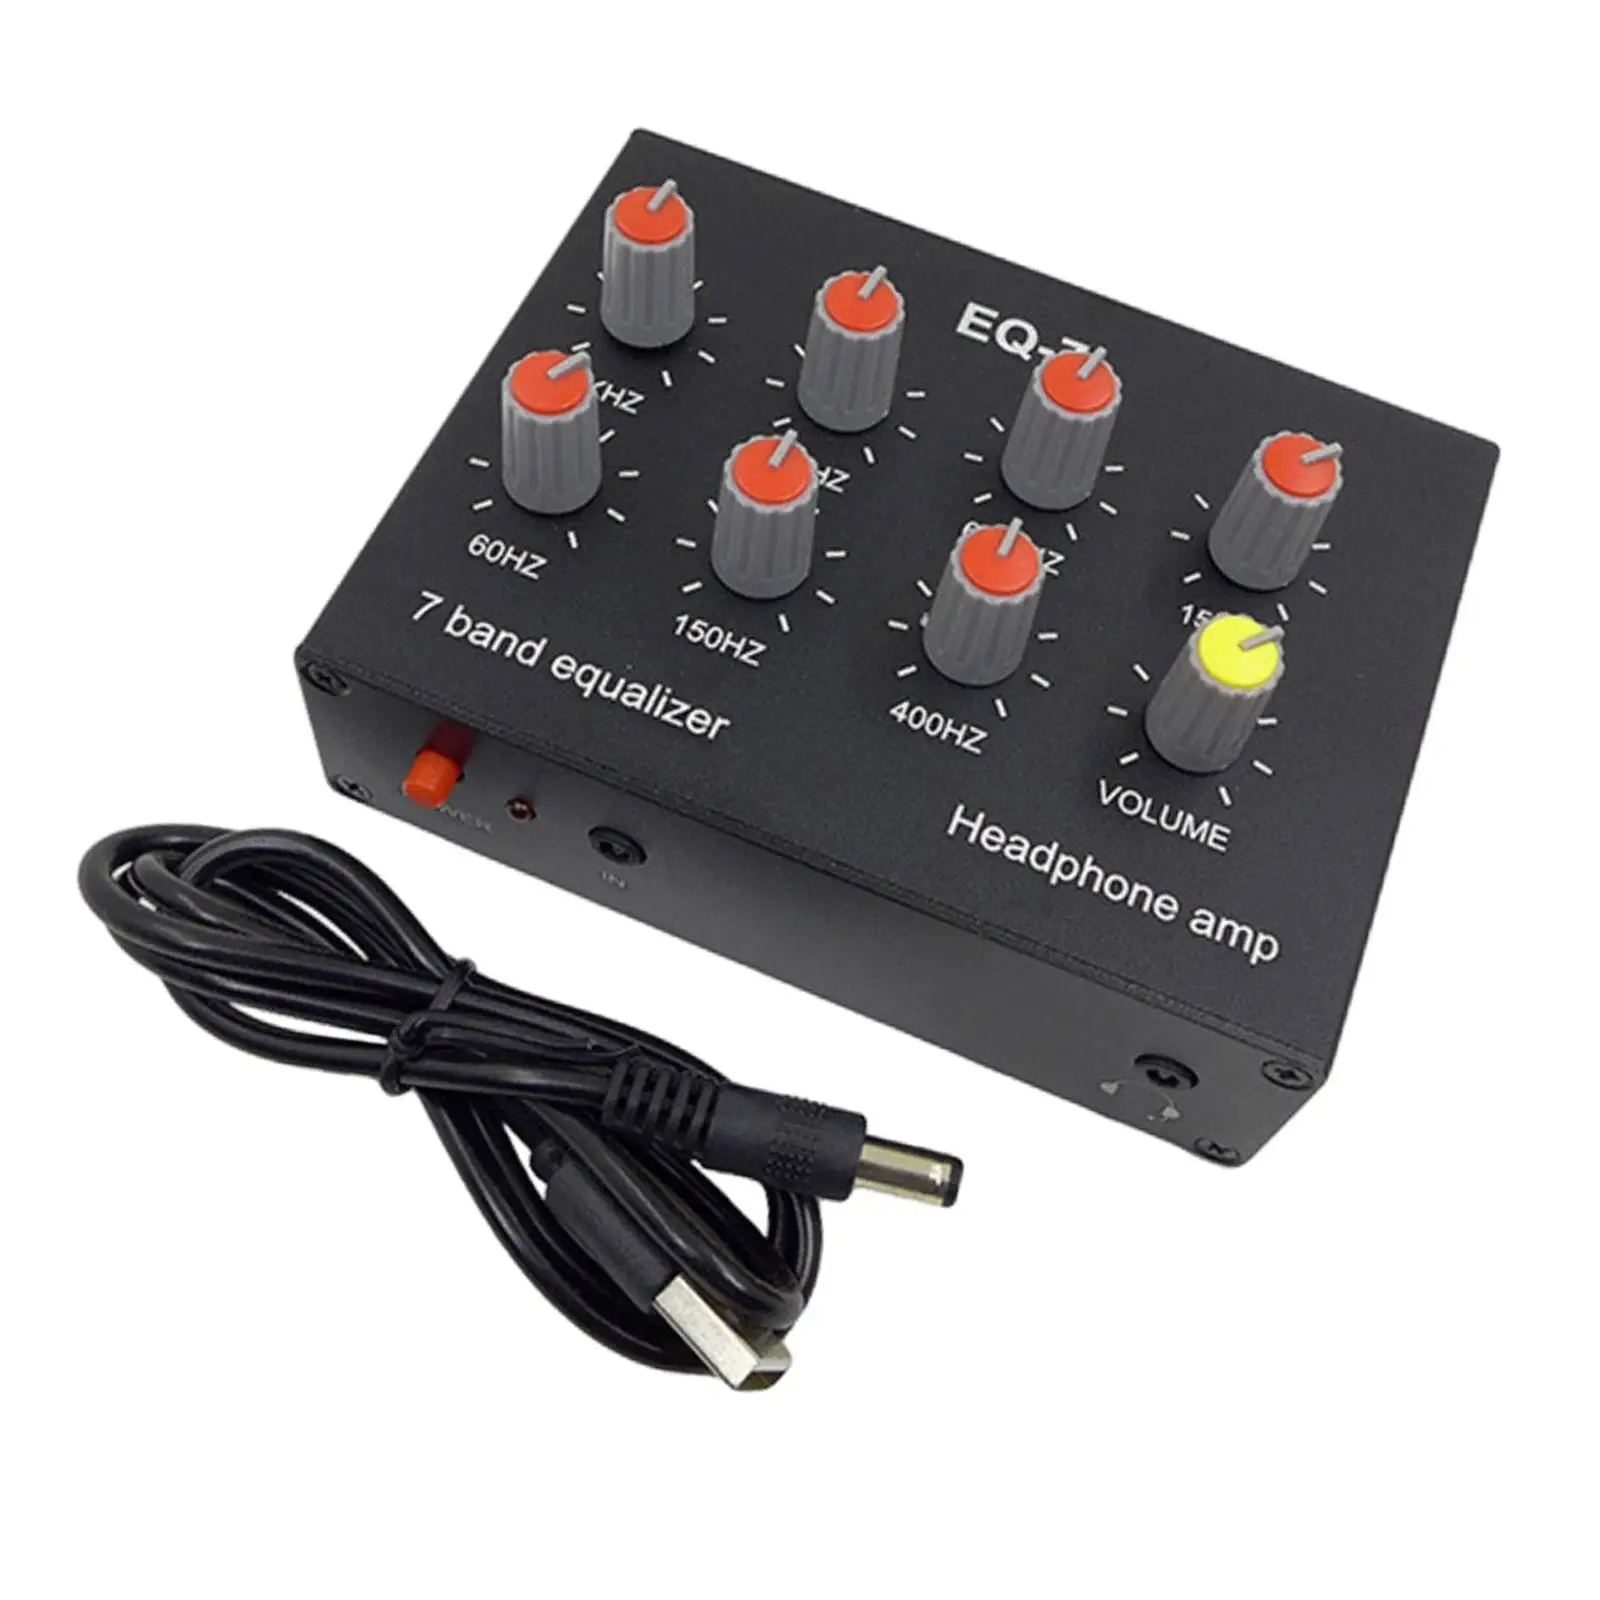 EQ-7 Preamp Equalizer Stereo Amplifier Sturdy Portable Low Noise Audio Signal Preamplifier for Phone Auto Home Laptop Headphone